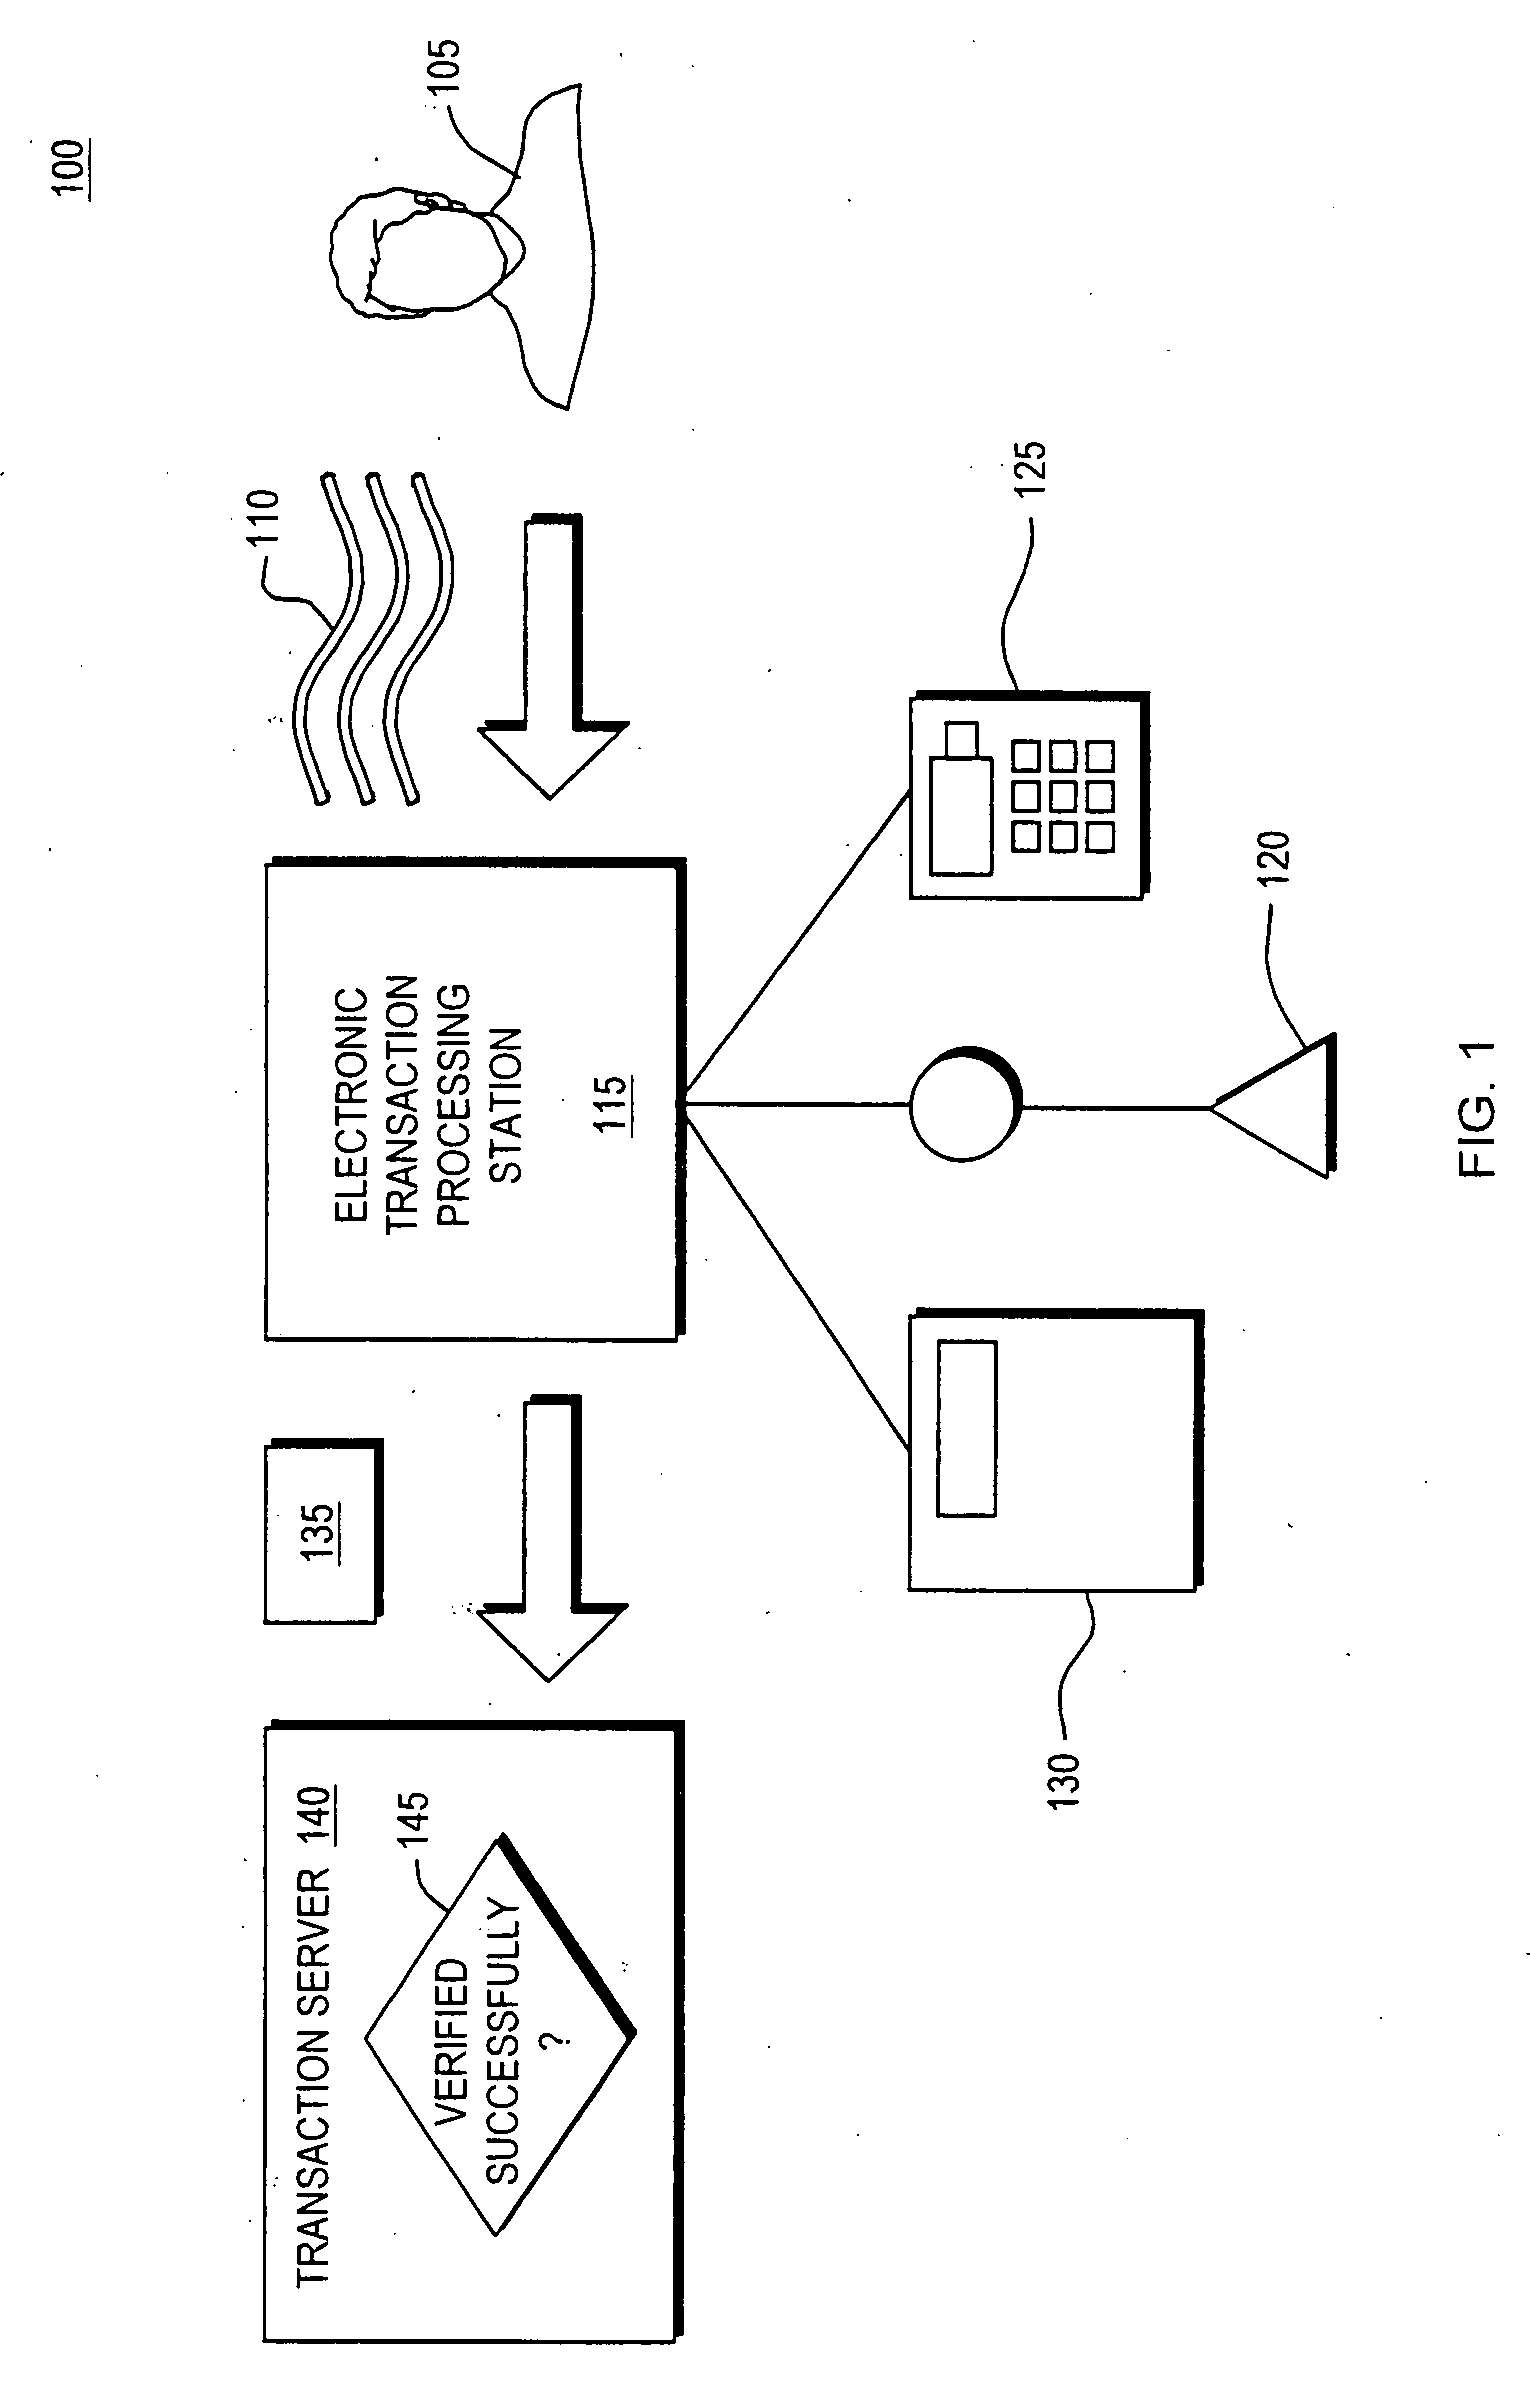 System and Method for Radio Frequency Identifier Voice Signature